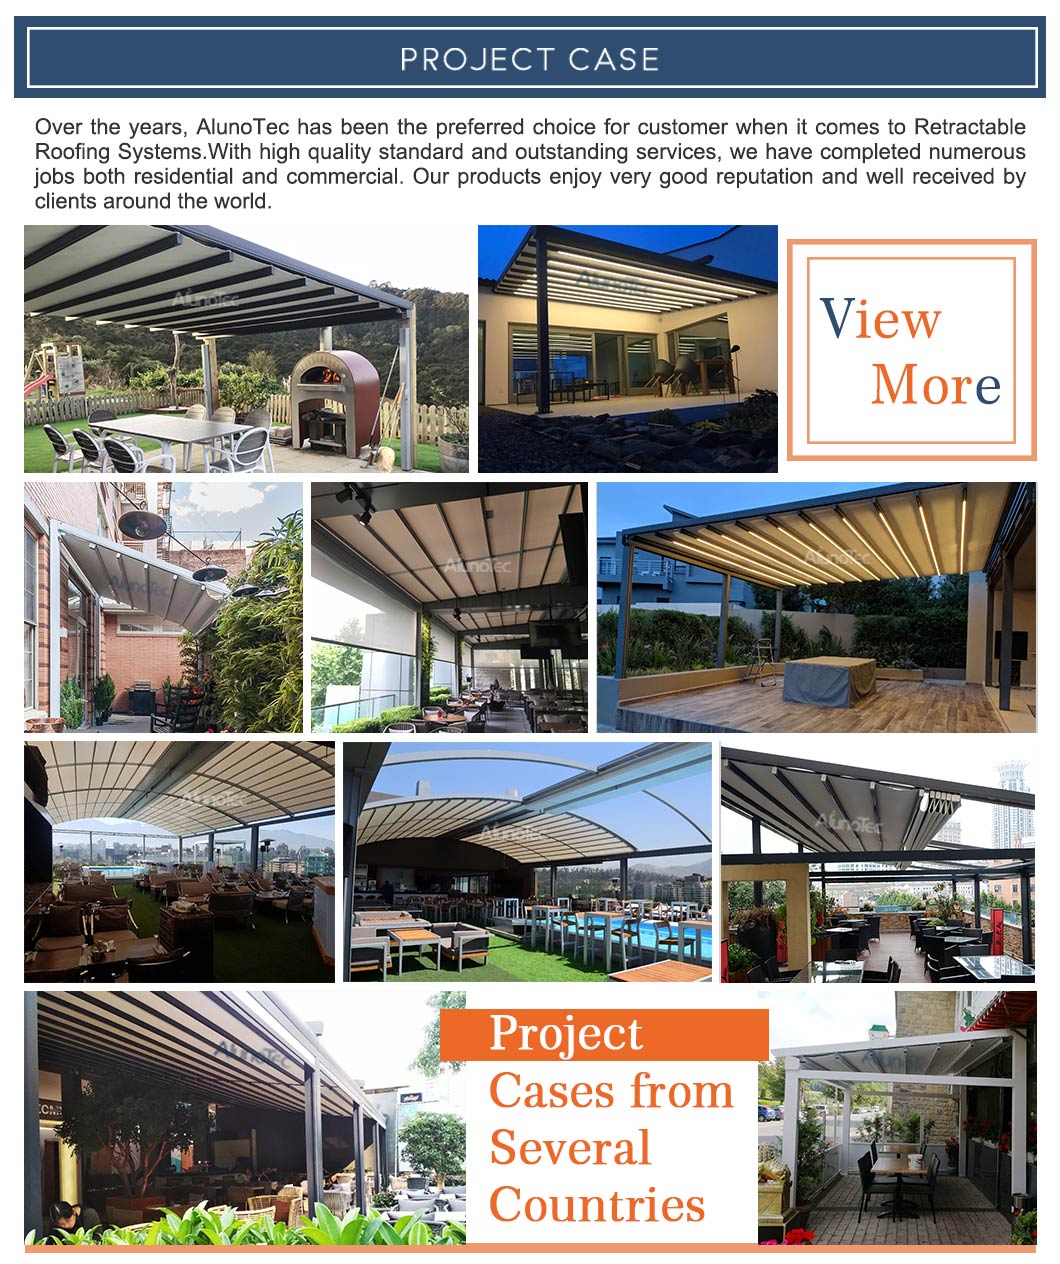 Pvc Retractable Roof,Outdoor Retractable Awnings